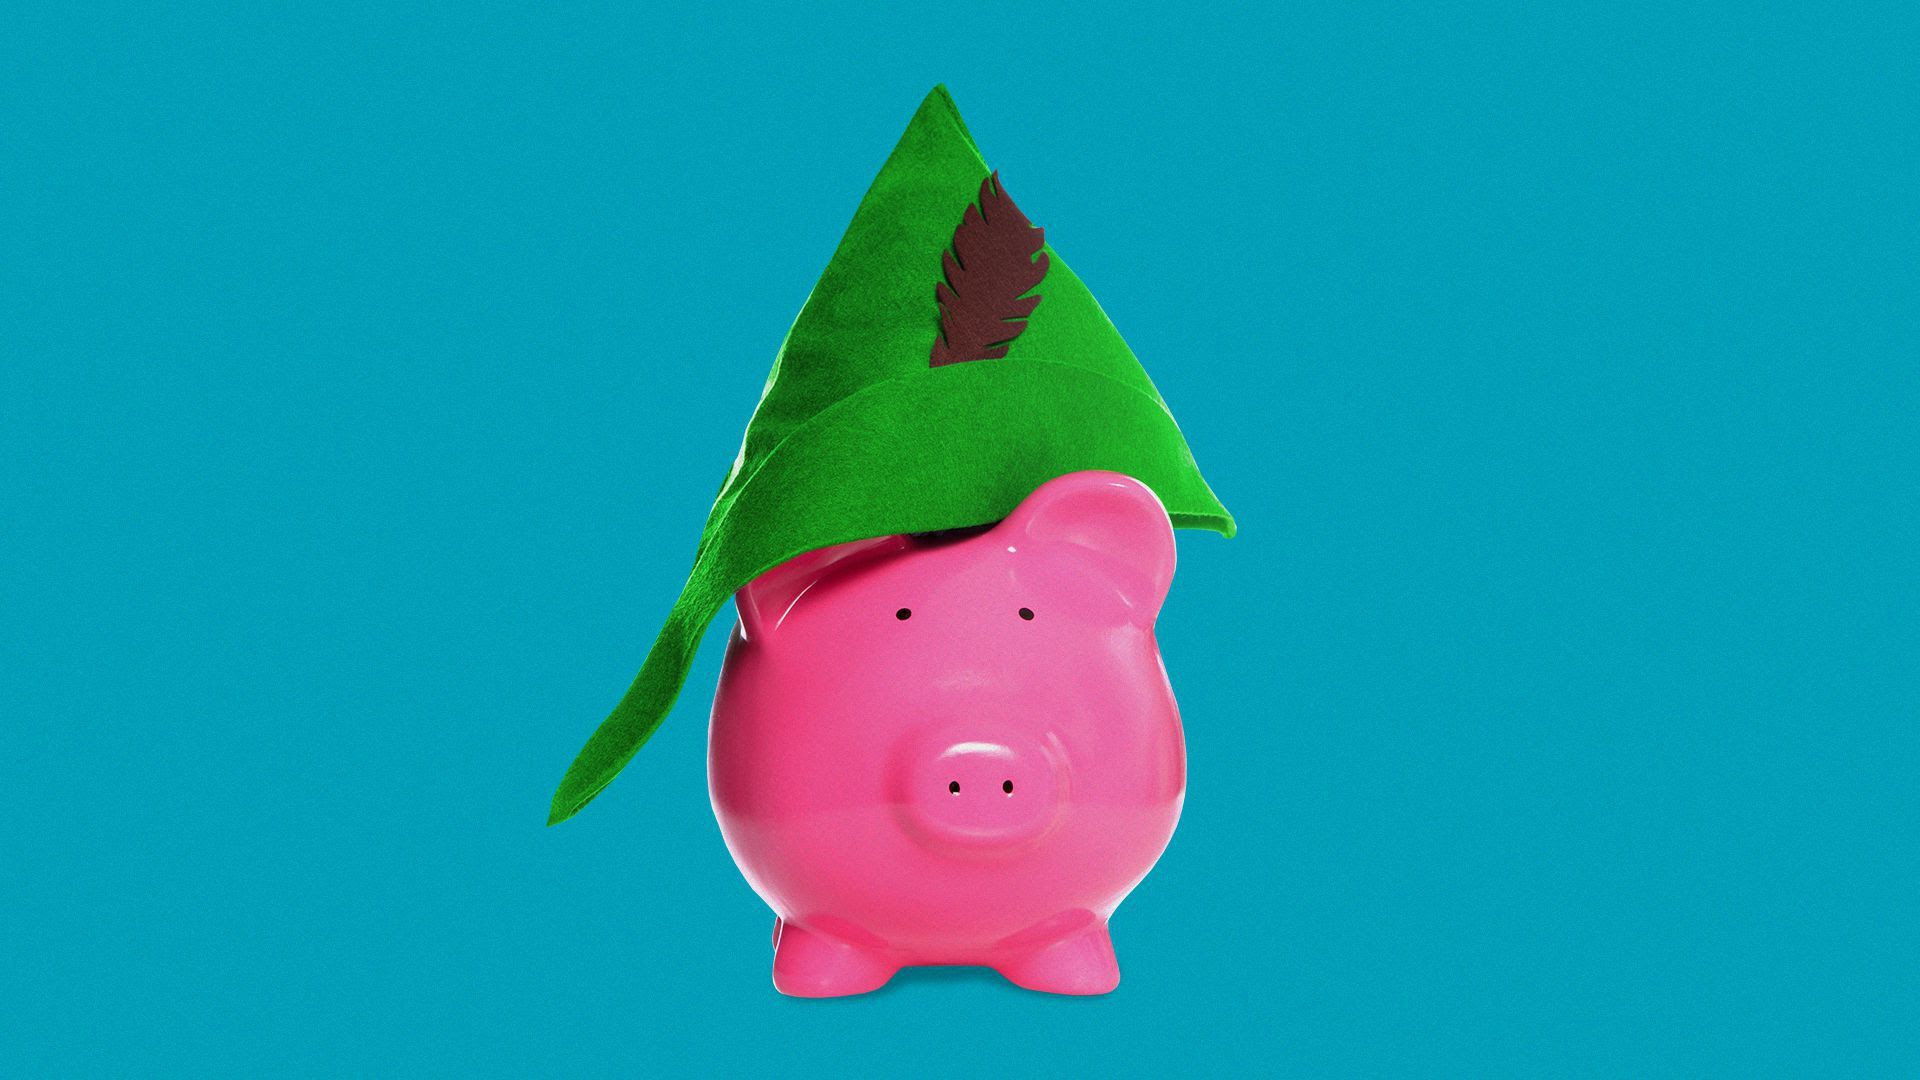 Illustration of a piggy bank with a Robin Hood hat on.